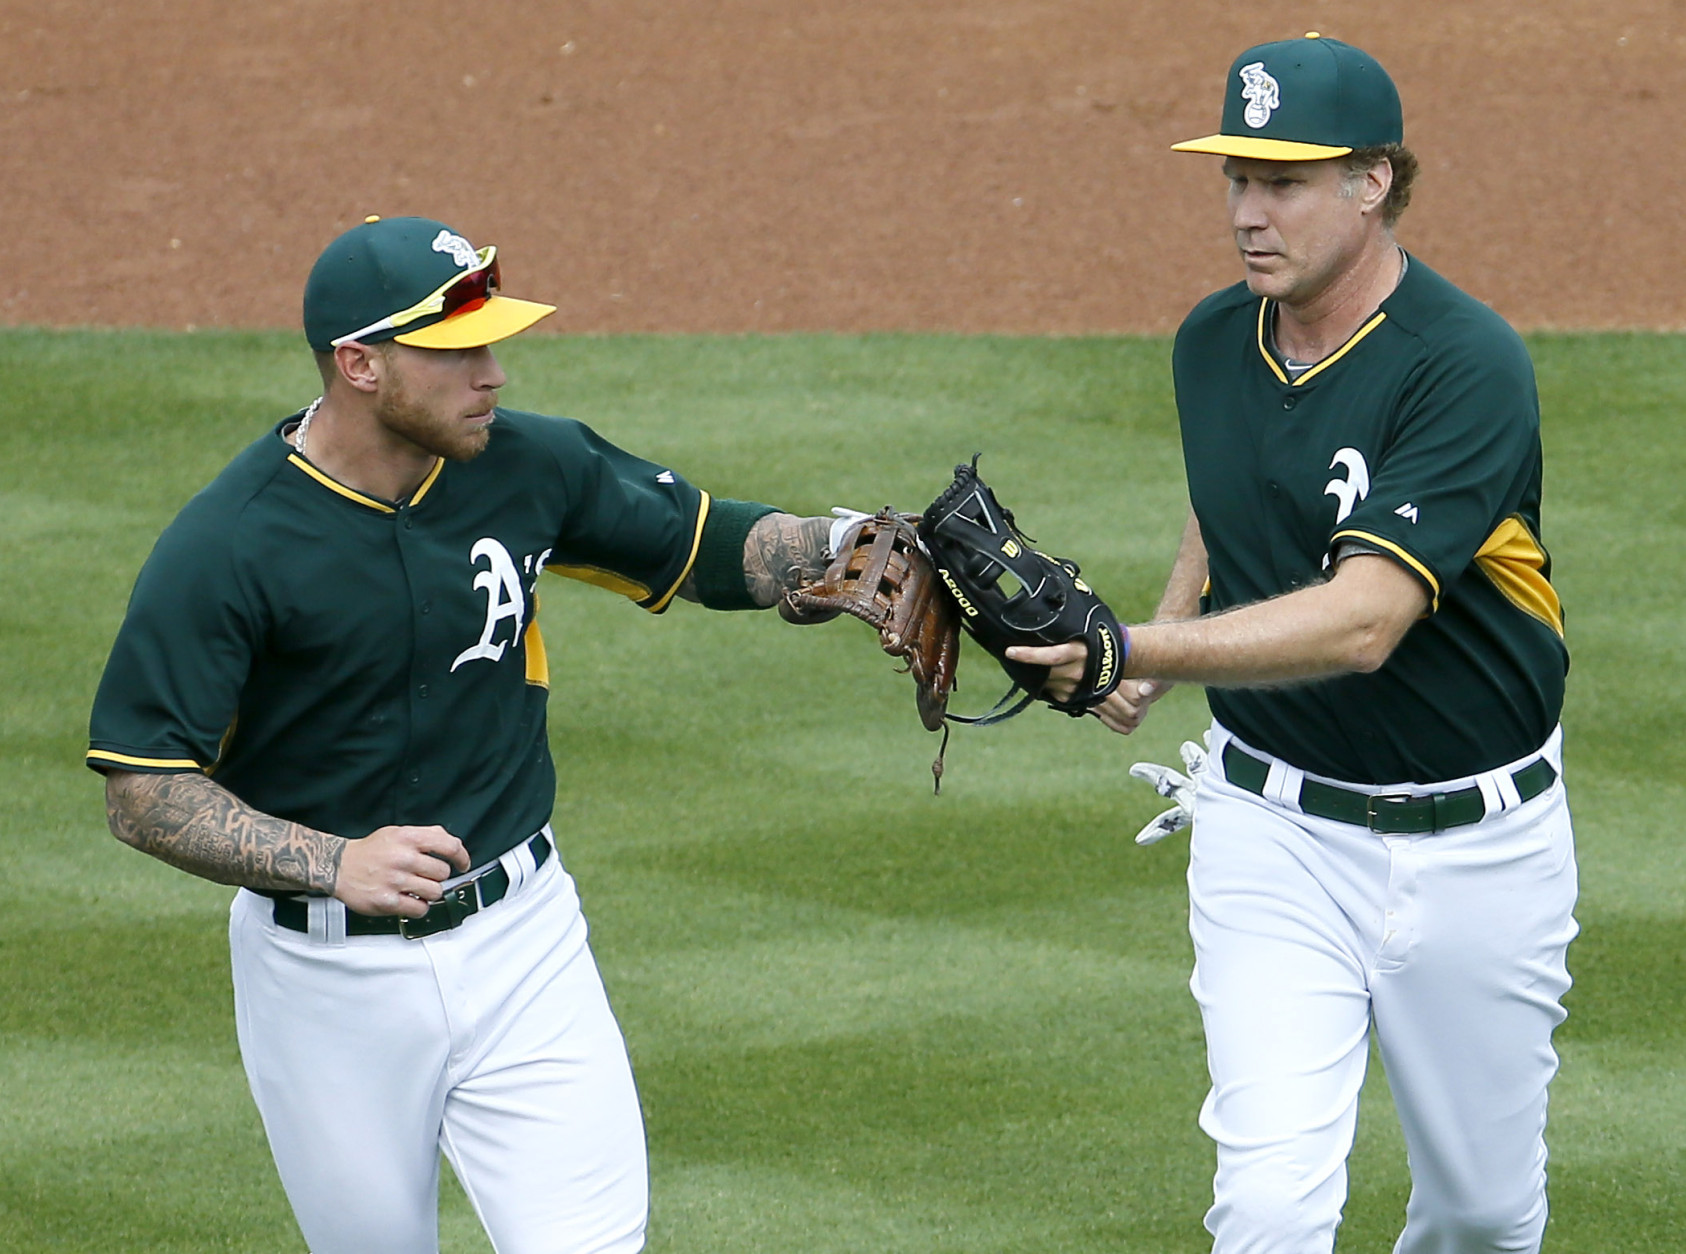 Actor Will Ferrell, right, congratulates Oakland Athletics' Brett Lawrie after the first inning of a spring training baseball game against the Seattle Mariners, Thursday, March 12, 2015, in Mesa, Ariz. The comedian plans to play every position while making appearances at five Arizona spring training games on Thursday. (AP Photo/Matt York)